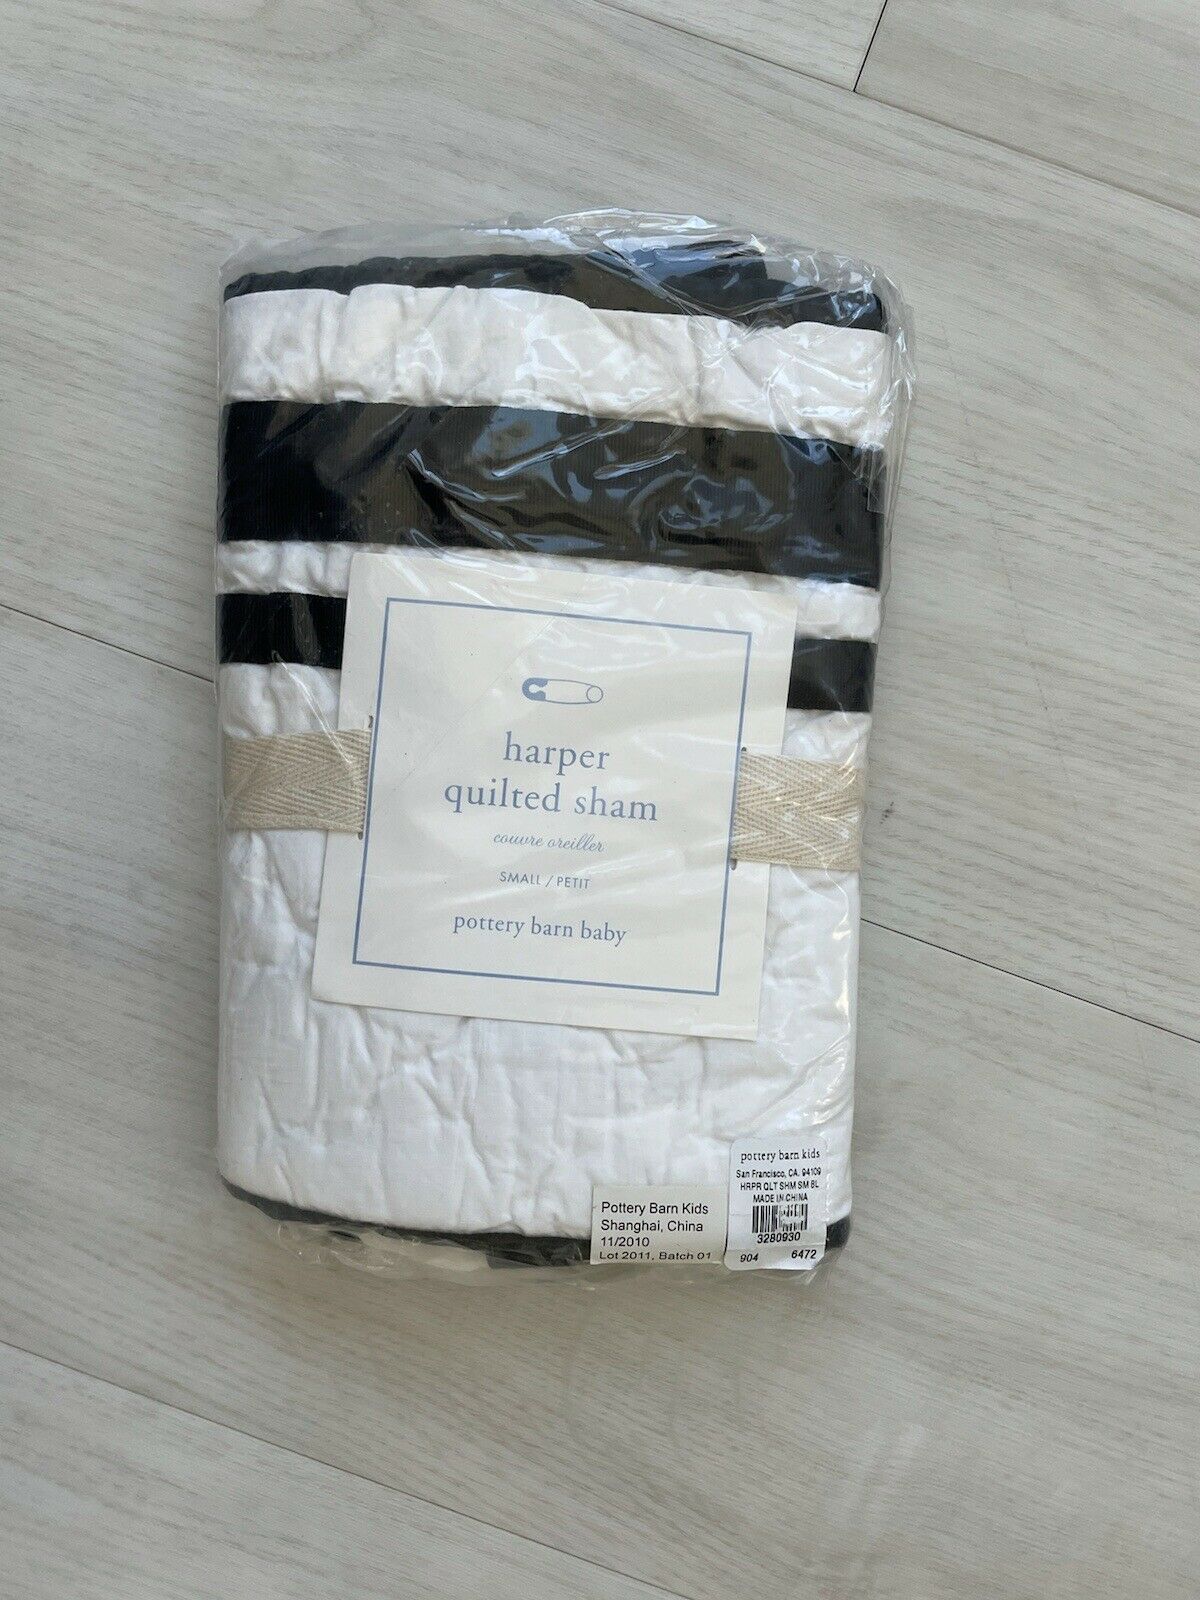 Nwt Pottery Barn Harper Quilted Sham